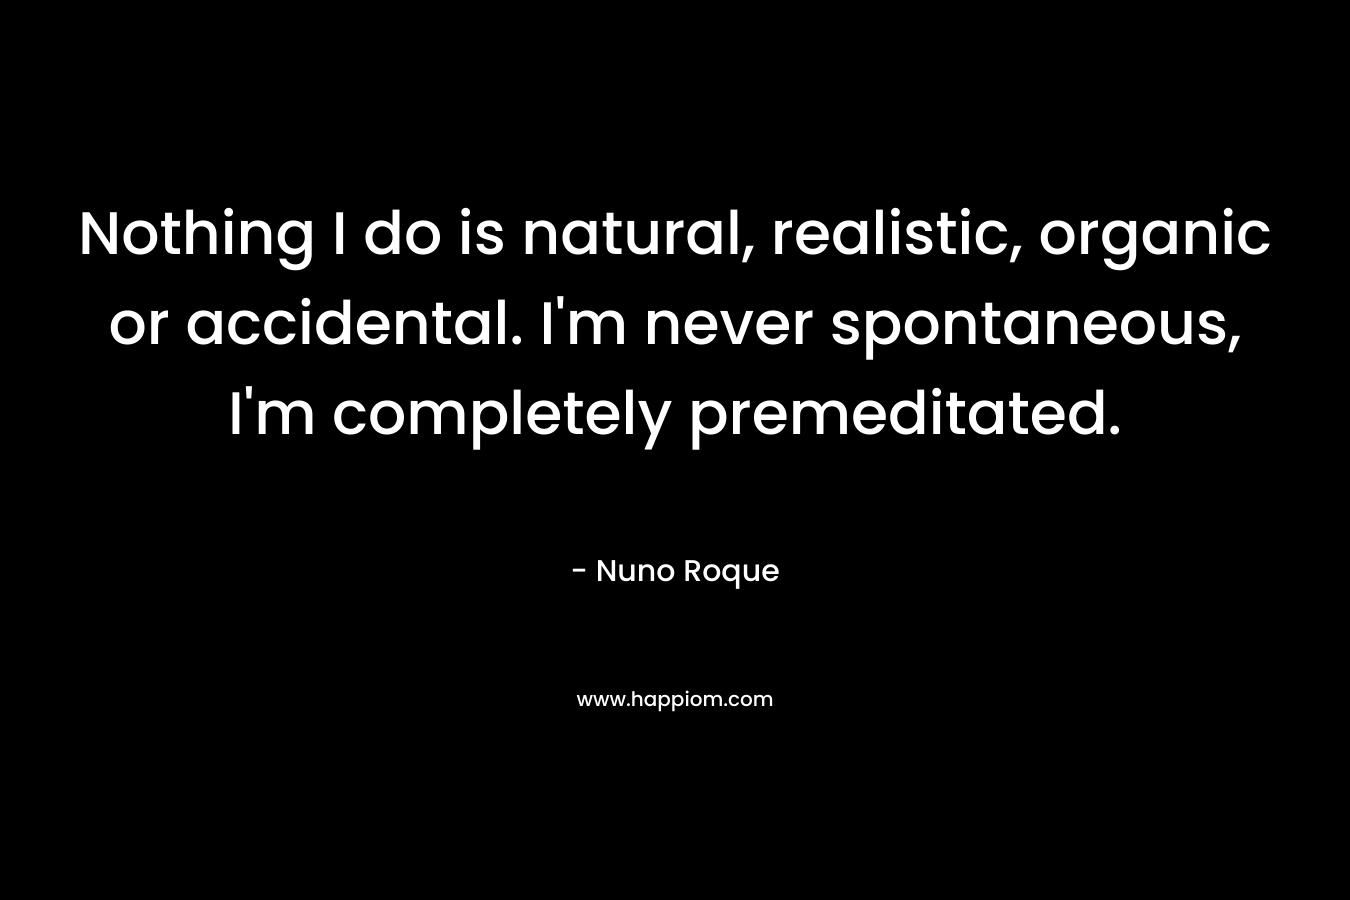 Nothing I do is natural, realistic, organic or accidental. I’m never spontaneous, I’m completely premeditated. – Nuno Roque